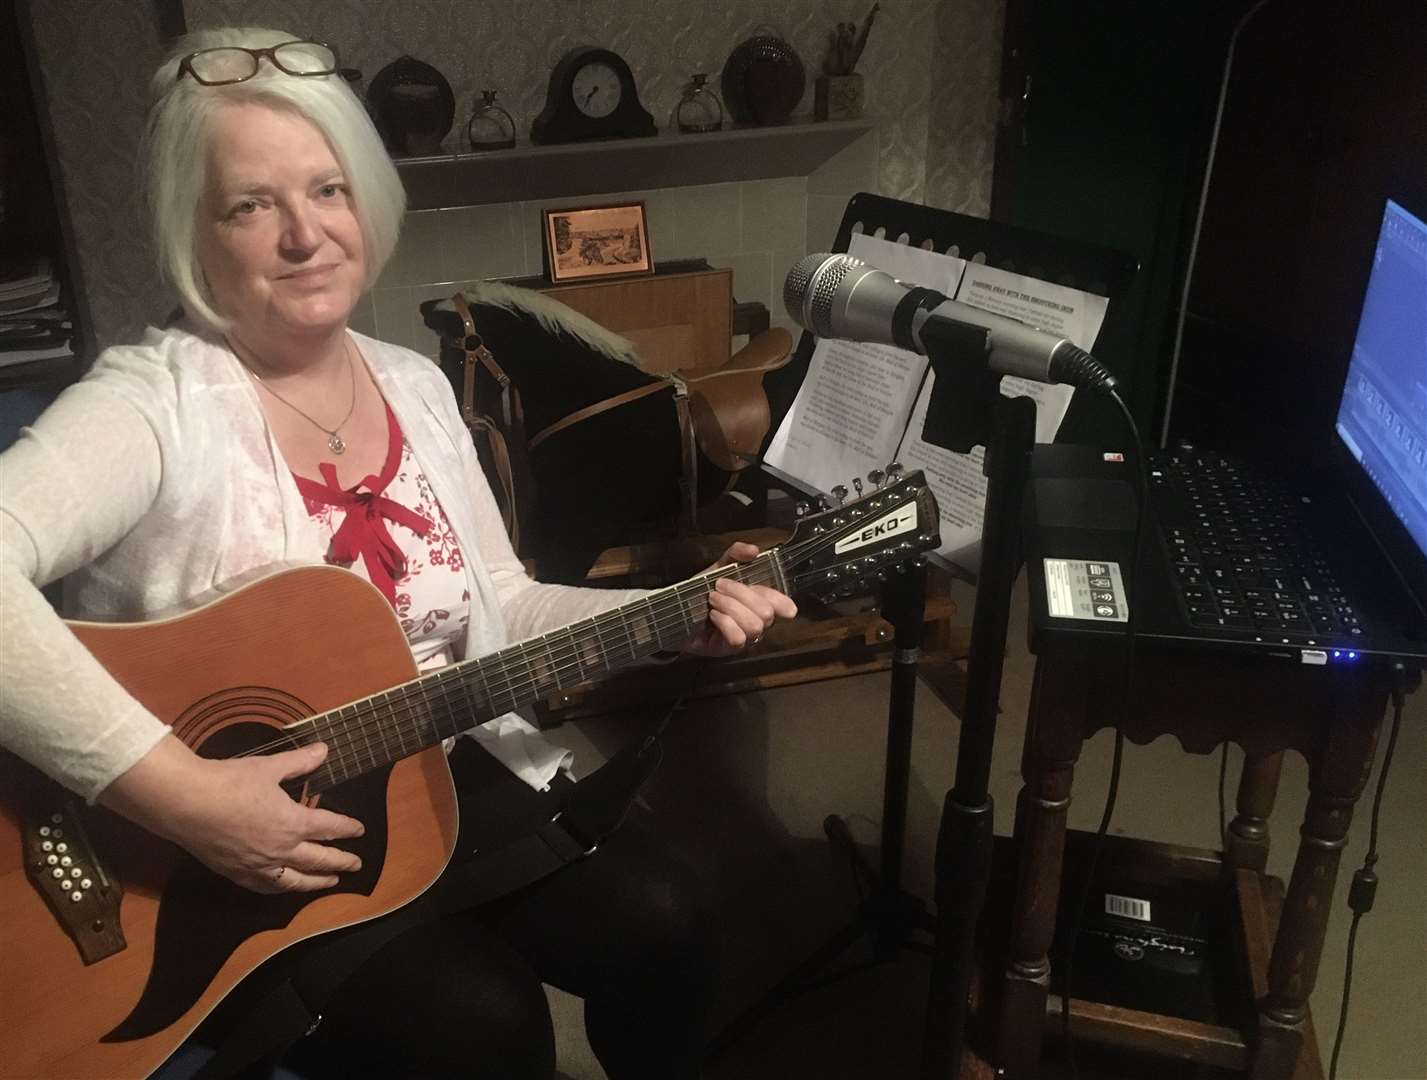 Christine Stone performing one of the songs for the weekly Peedie Café social media slot.